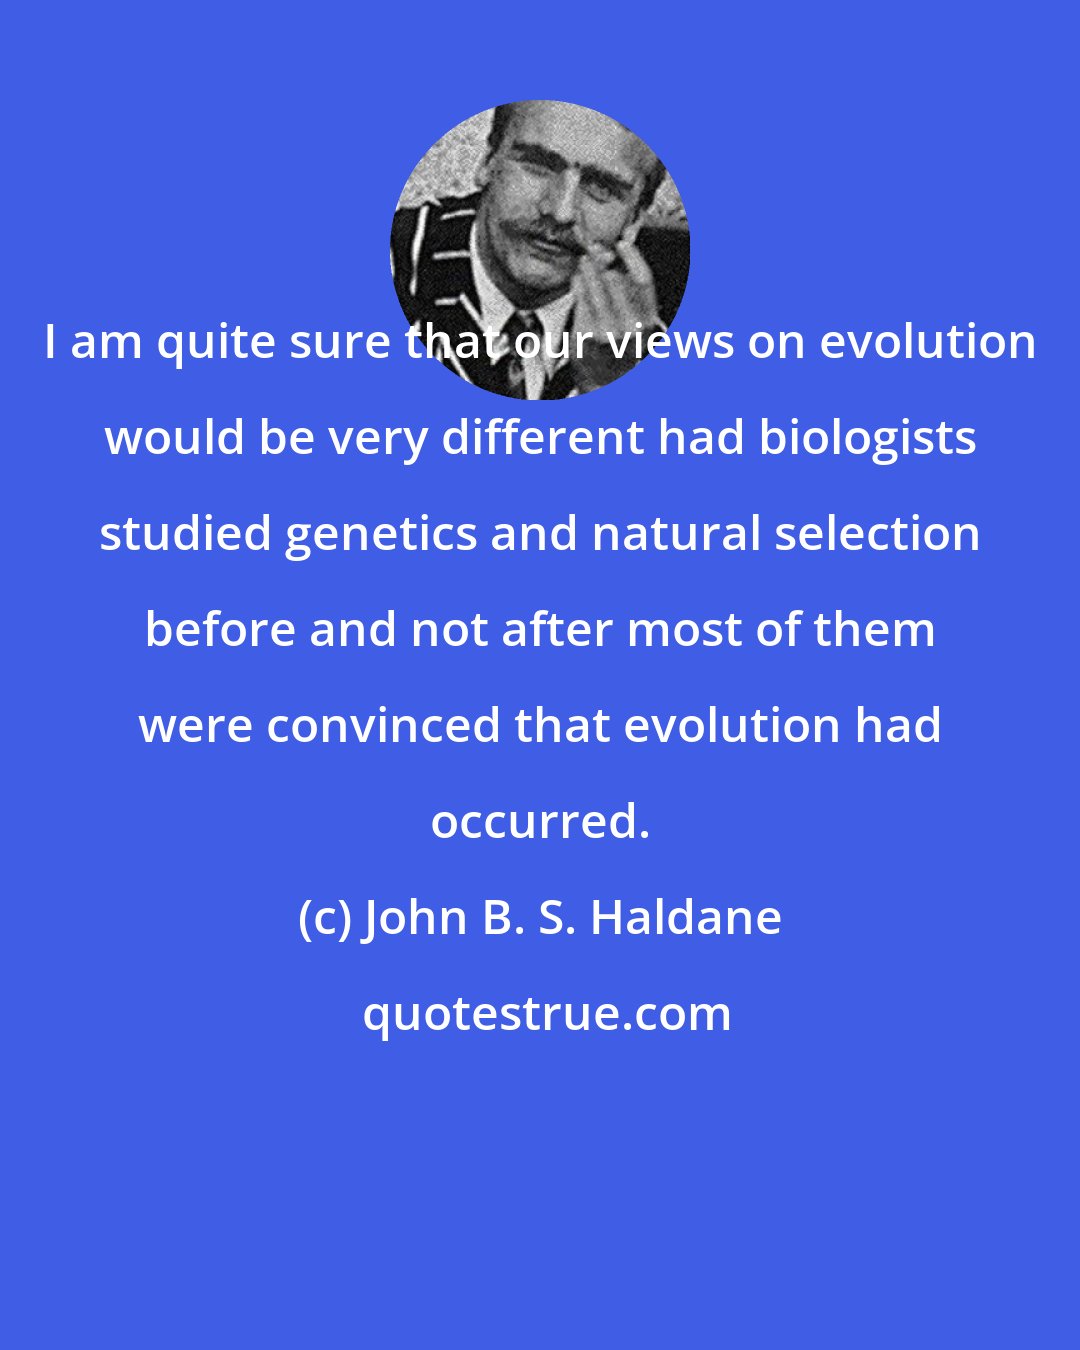 John B. S. Haldane: I am quite sure that our views on evolution would be very different had biologists studied genetics and natural selection before and not after most of them were convinced that evolution had occurred.